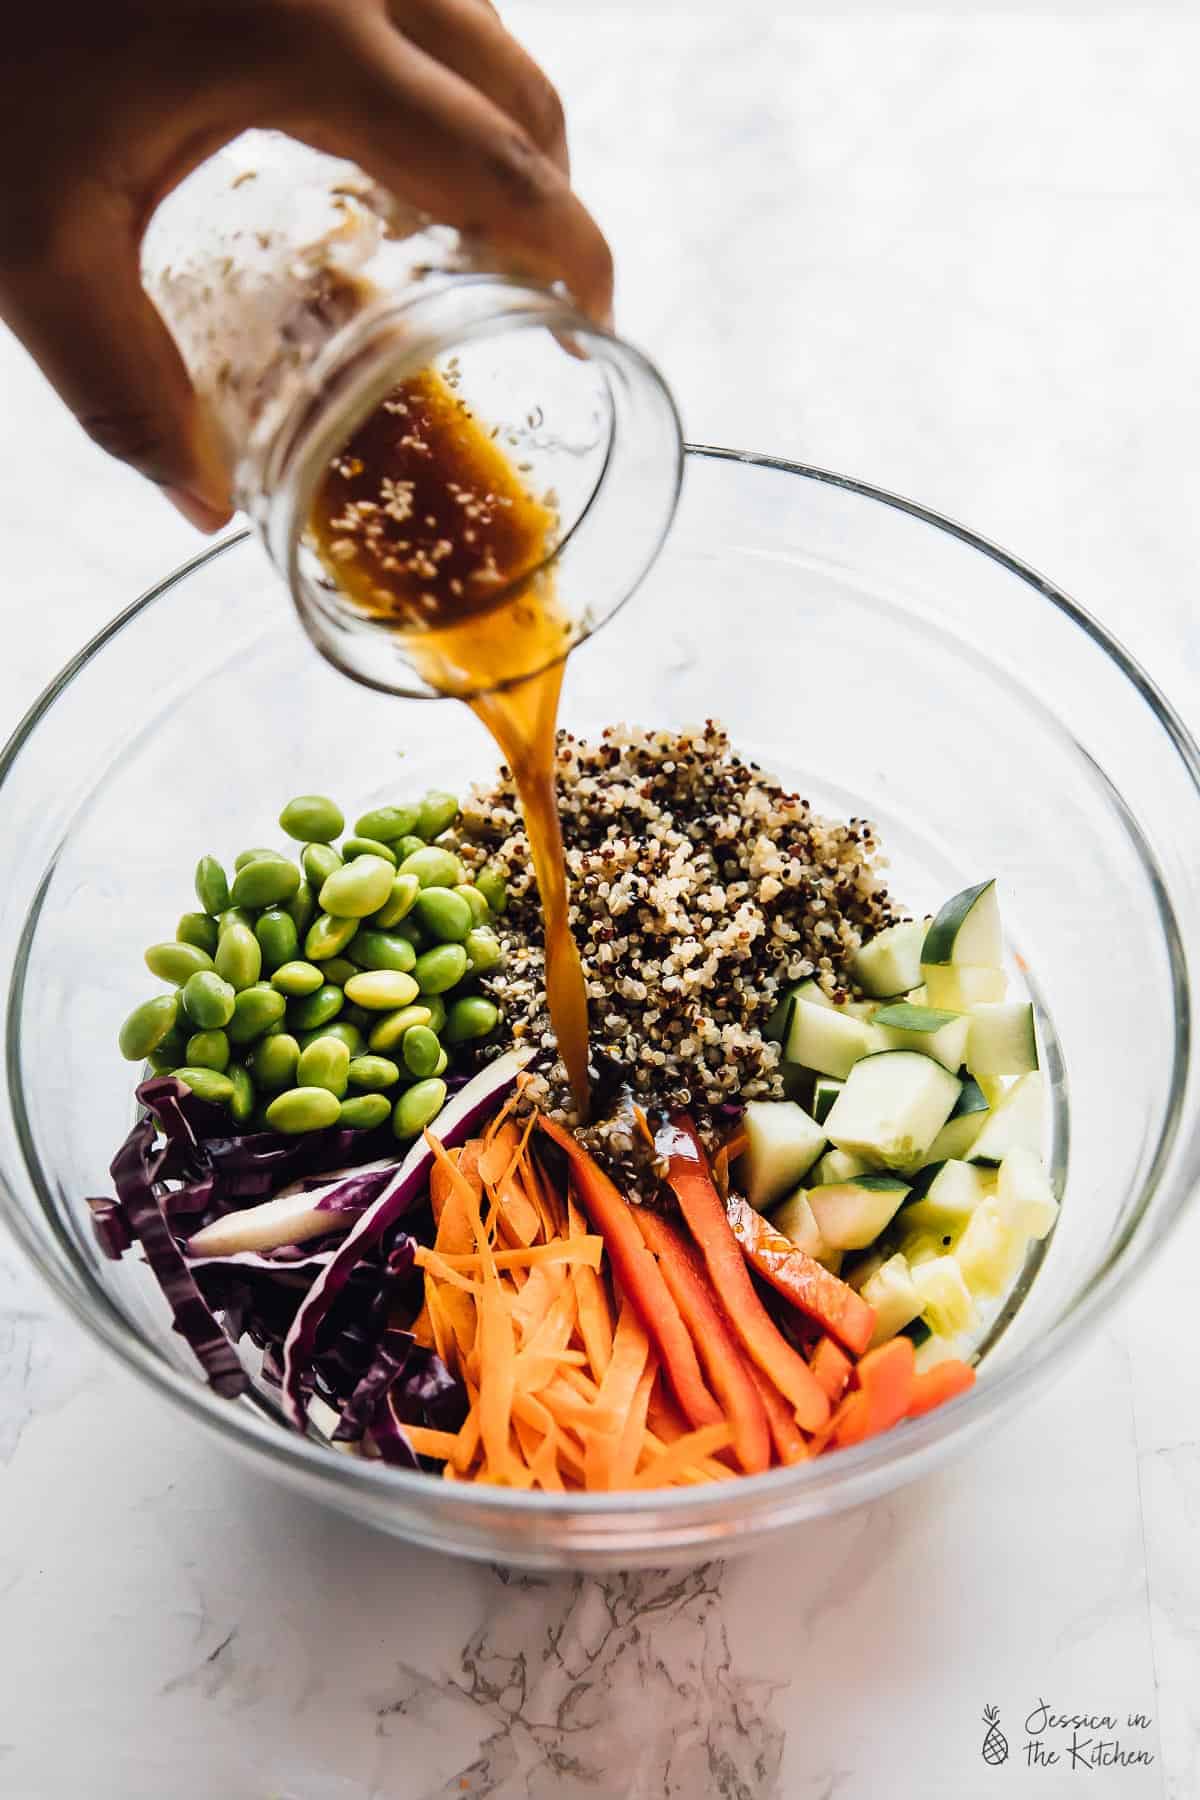 This 15 Minute Asian Quinoa Salad is loaded with so much flavour! It's a colourful vegan meal perfect for a light but filling lunch or dinner and is dressed with a divine sesame ginger sauce!! via https://jessicainthekitchen.com via https://jessicainthekitchen.com #veganrecipes #vegans #vegetarians #recipes #plantbased #veganmeal #meals #healthy #breakfast #veganlife #veganeating